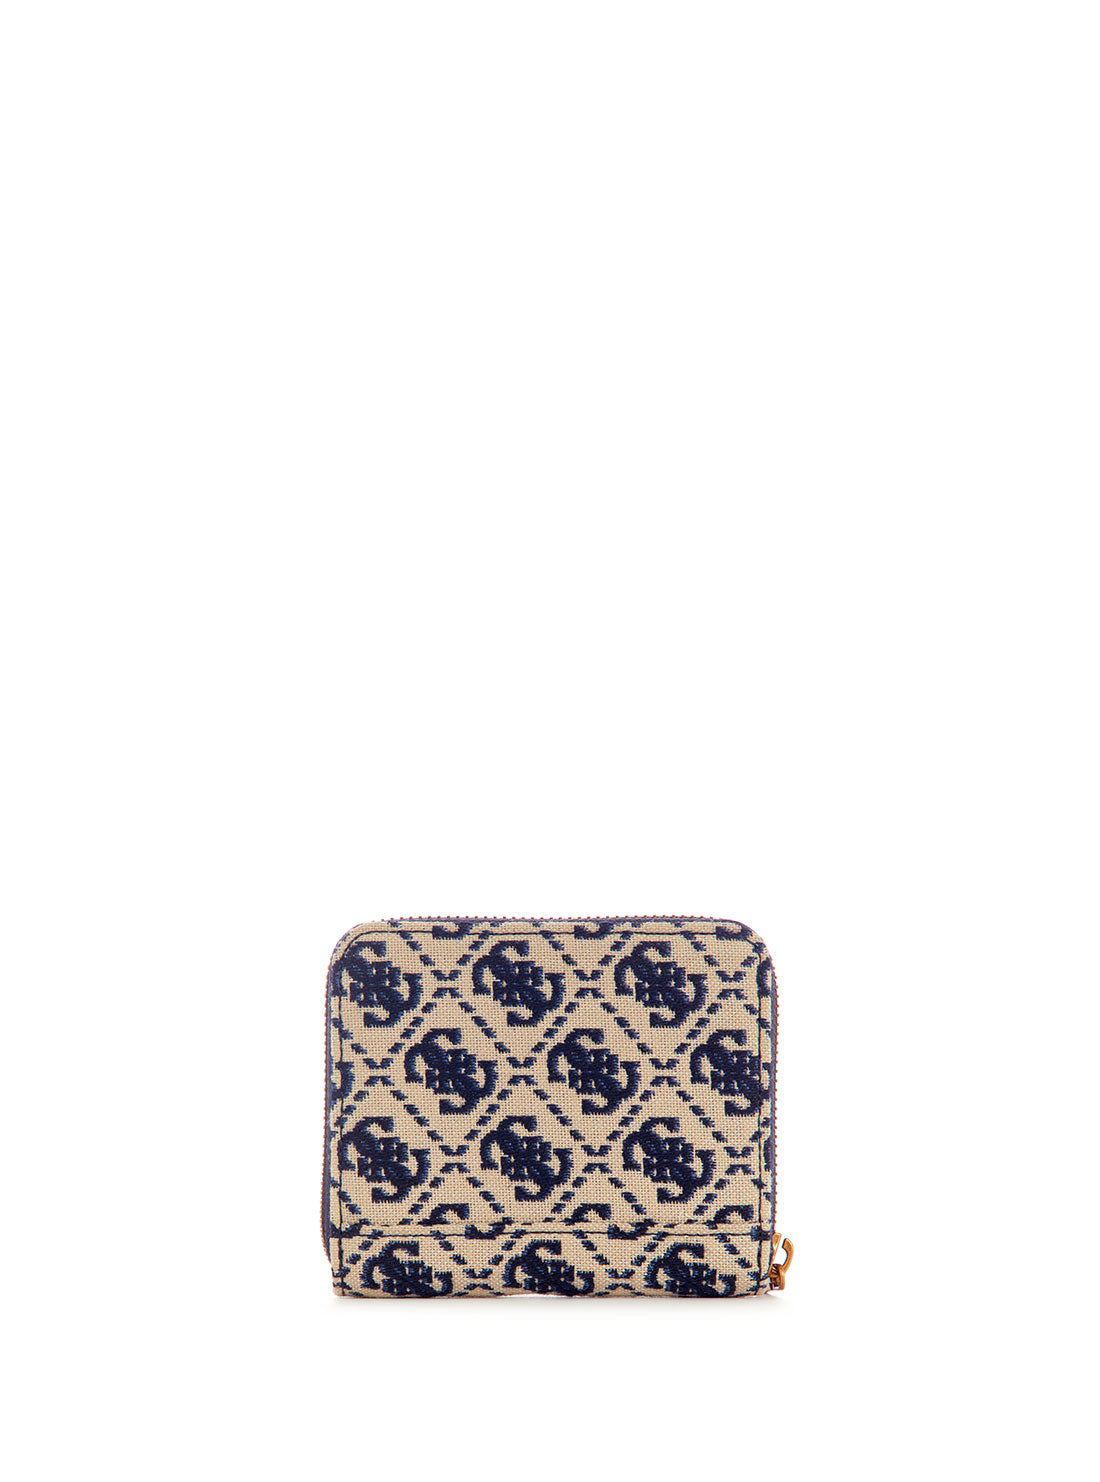 GUESS Women's Navy Logo Izzy Small Wallet JB865437 Back View